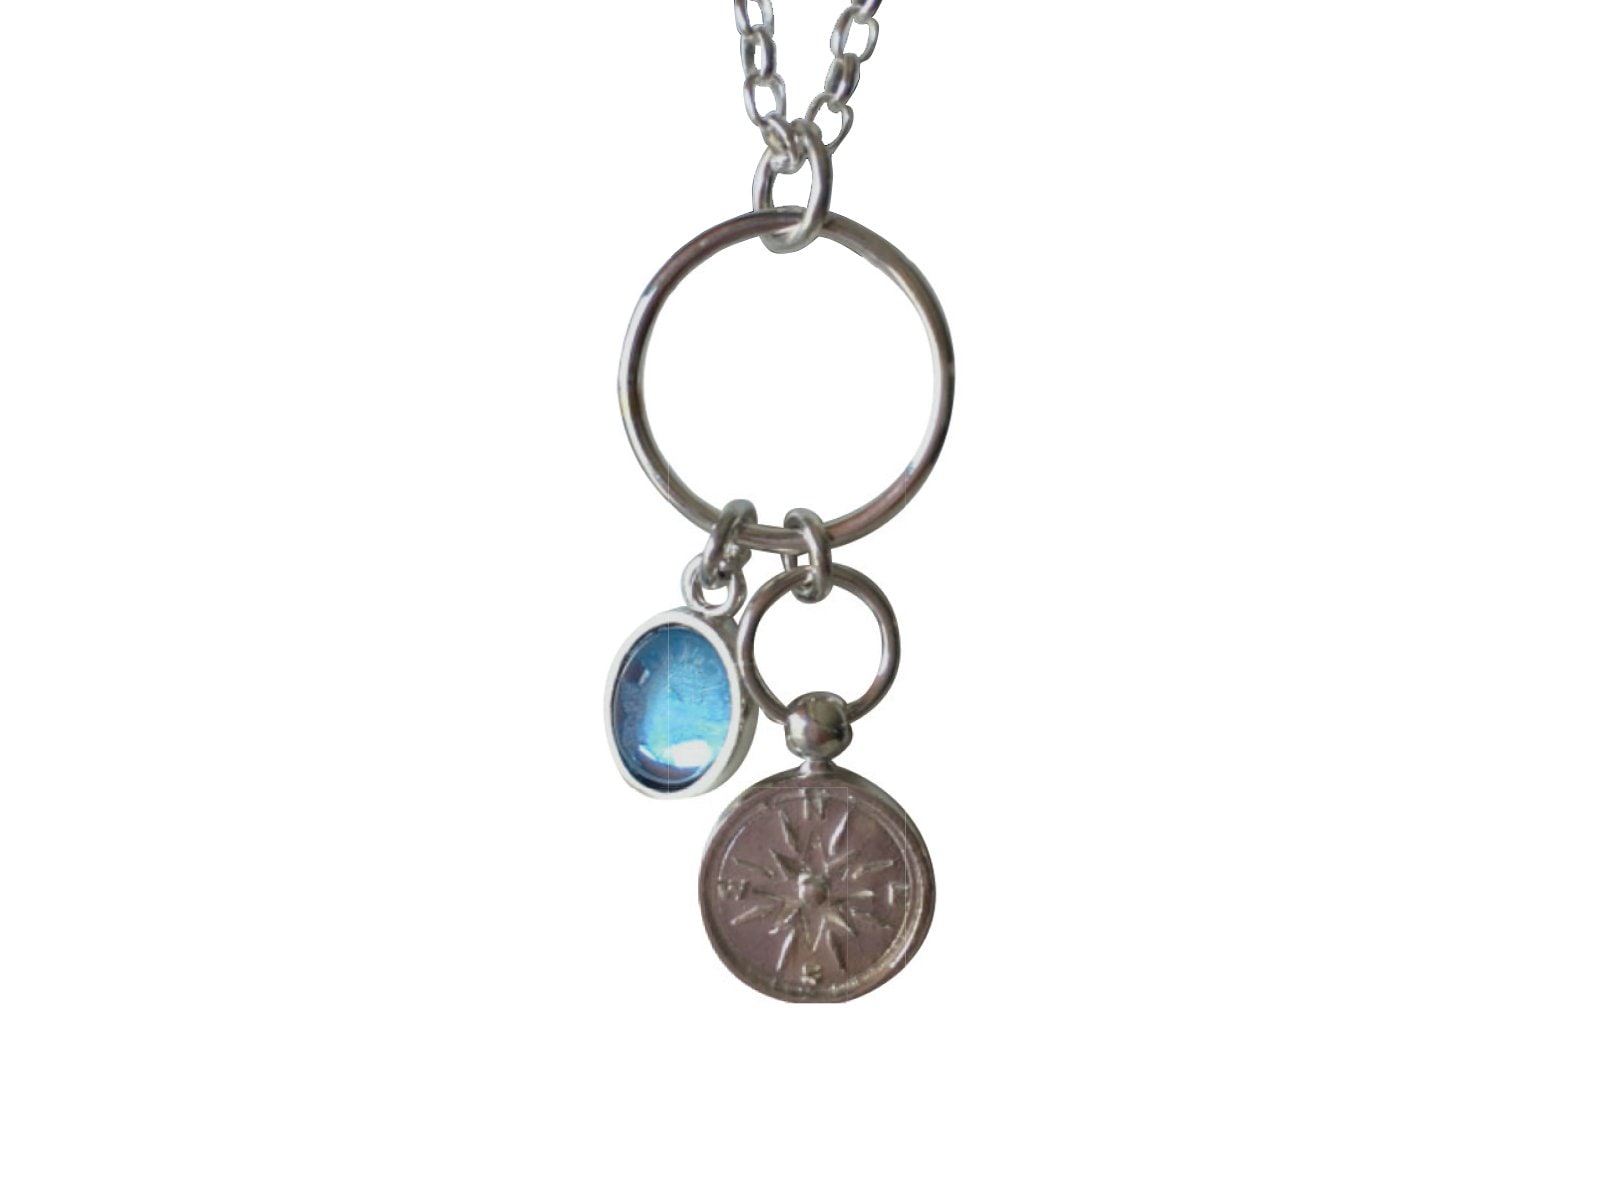 Lisa Hoskin Starkling Silver Compass Necklace with a blue gemstone and compass pendant